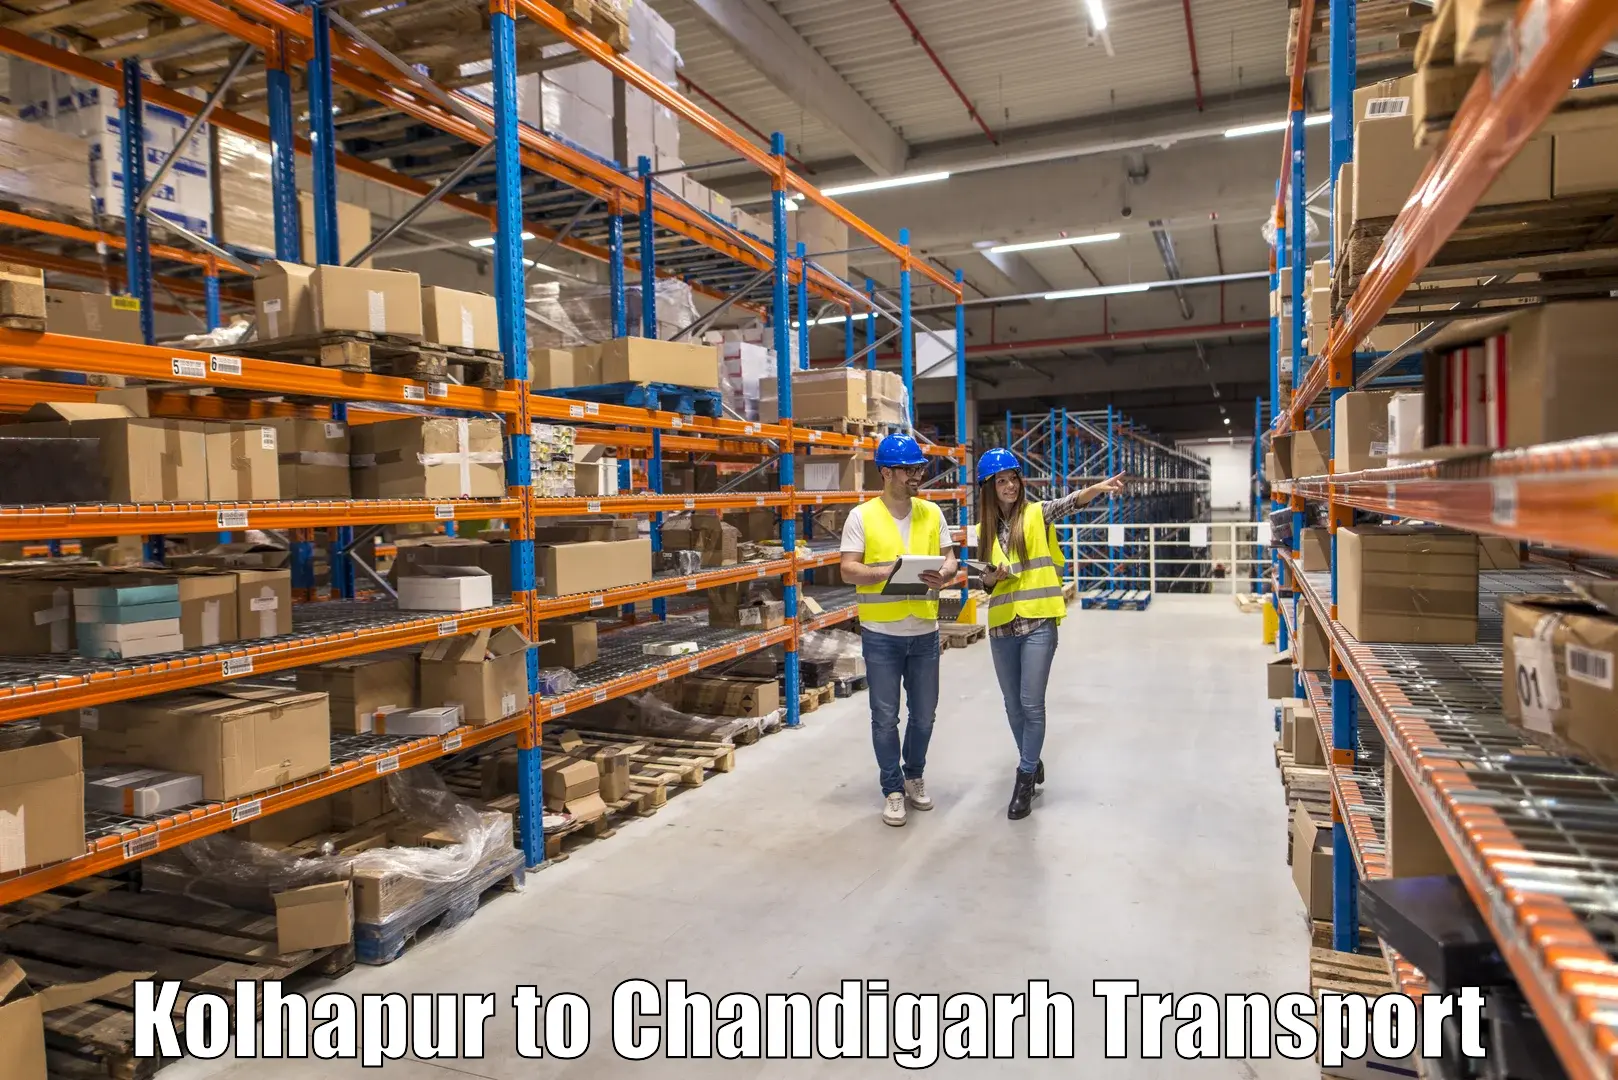 Daily transport service Kolhapur to Chandigarh